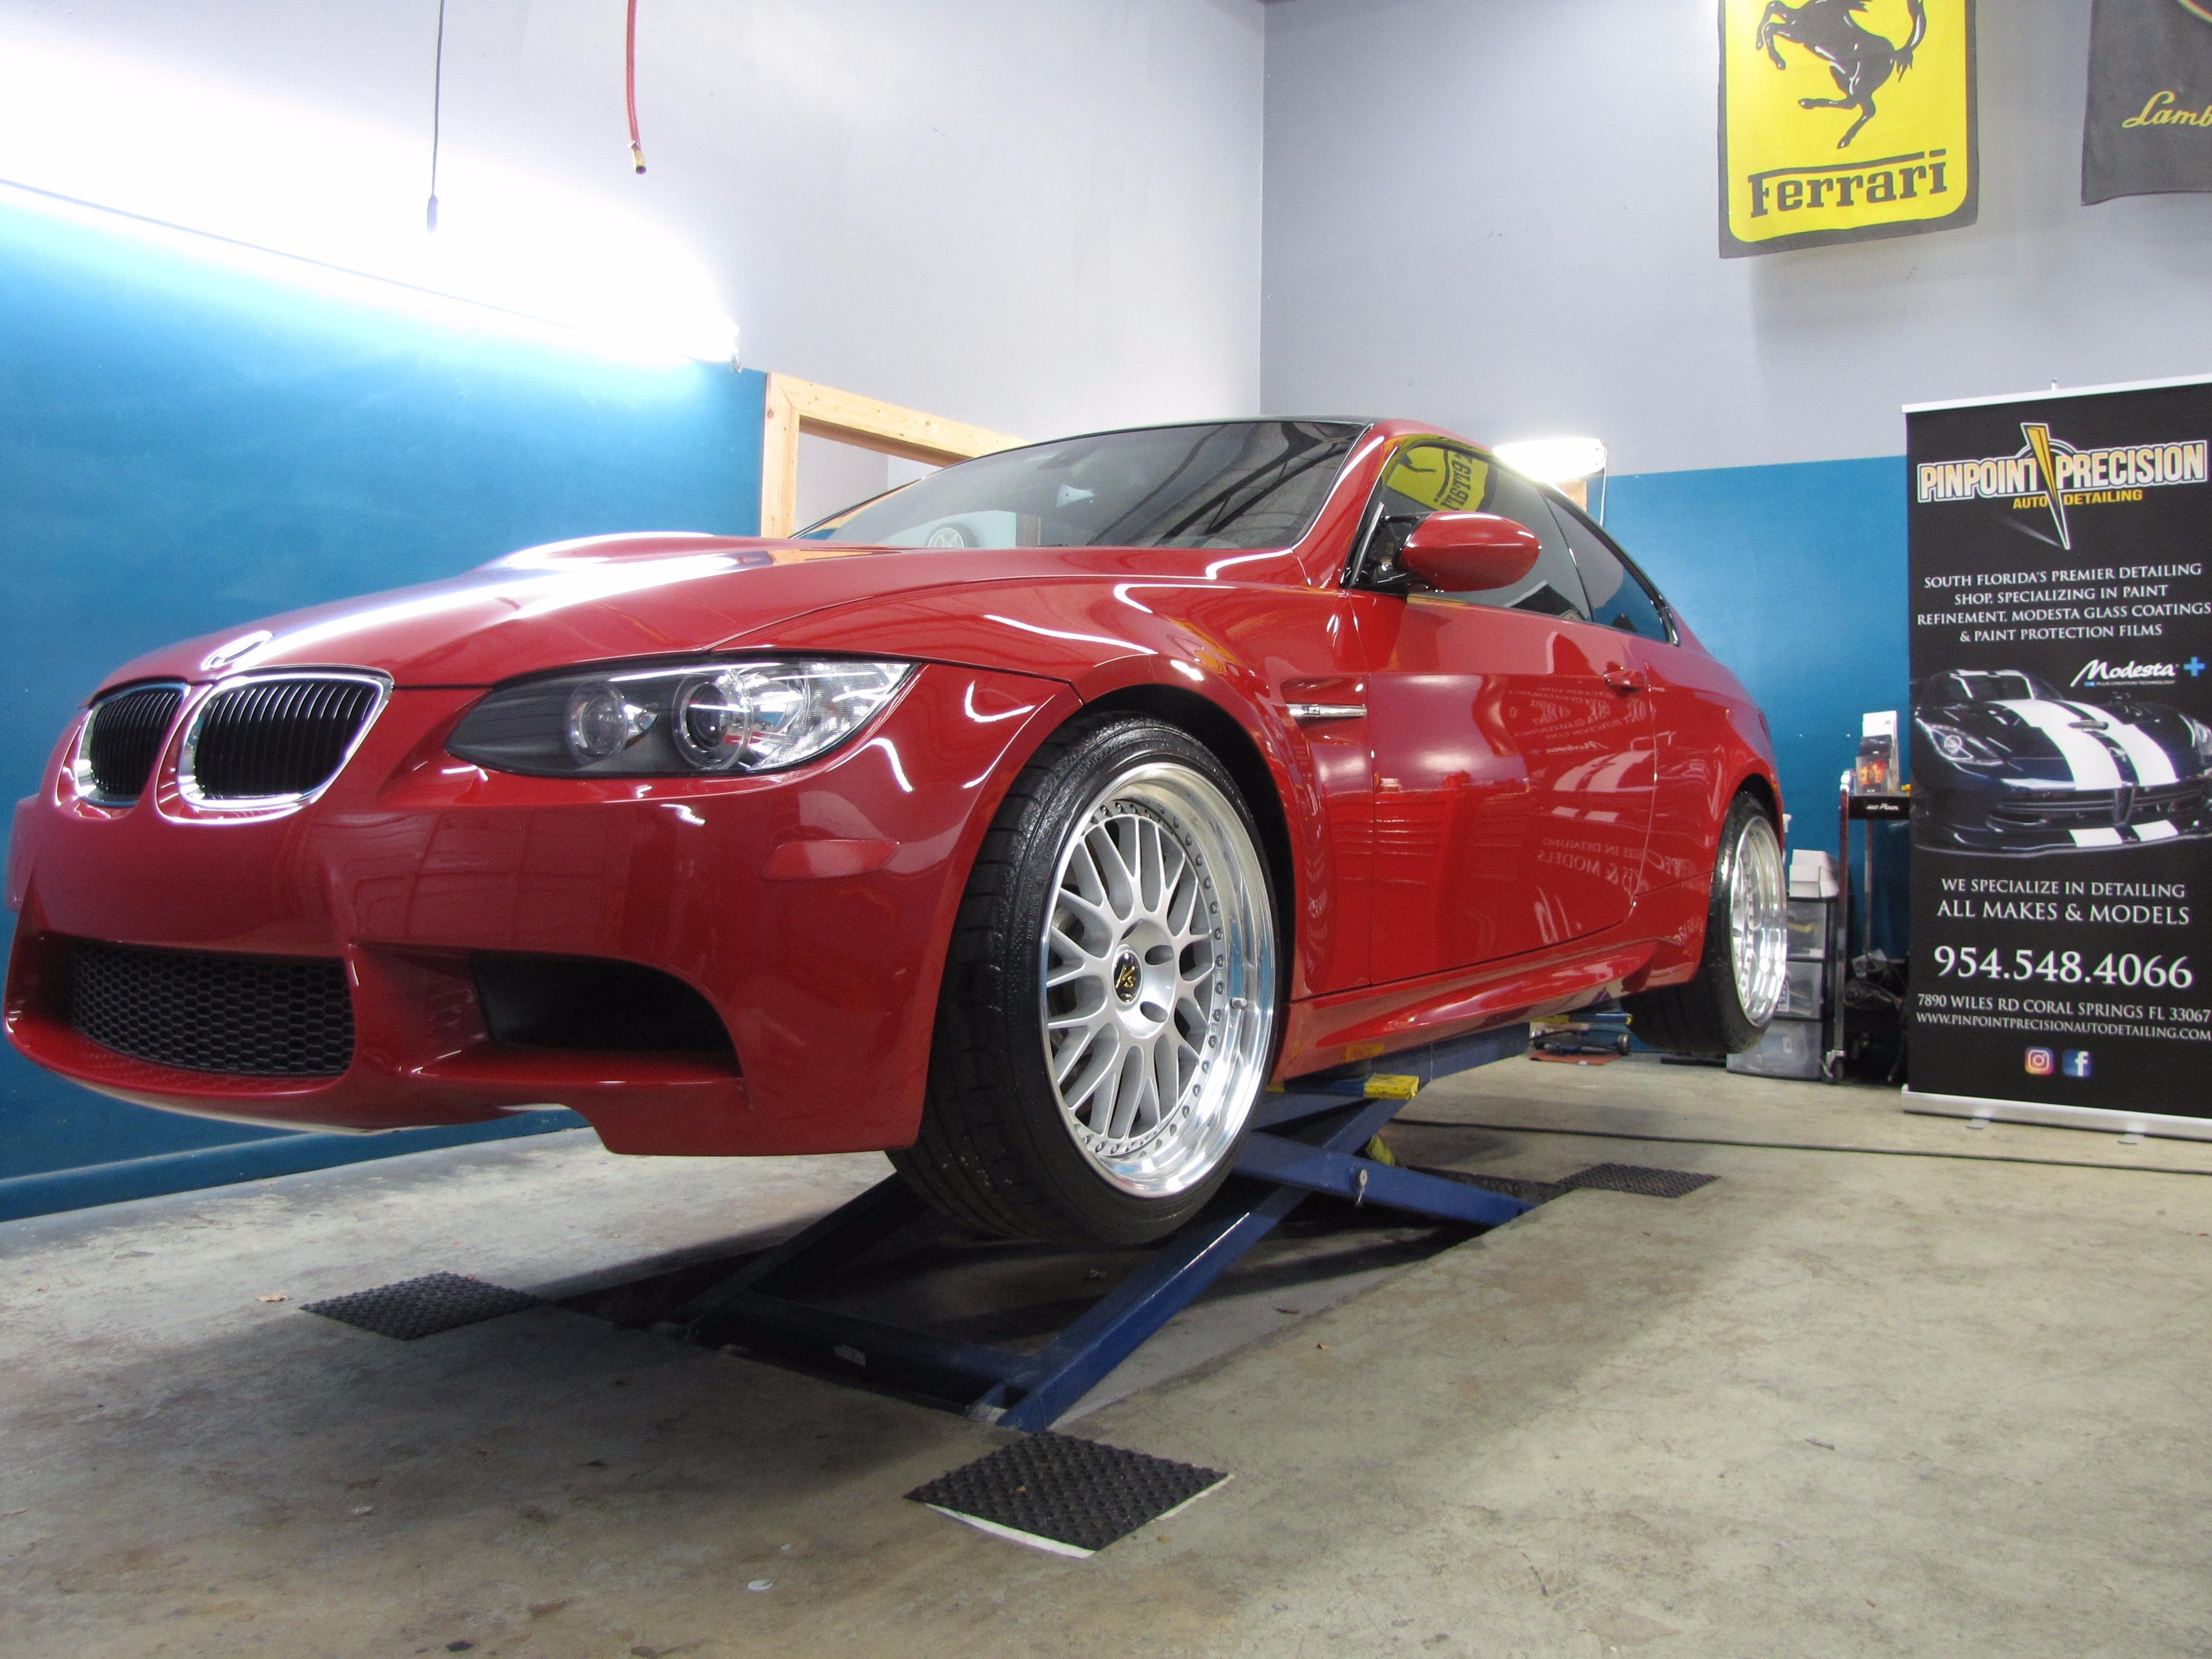 Pinpoint Precision Detailing Photo